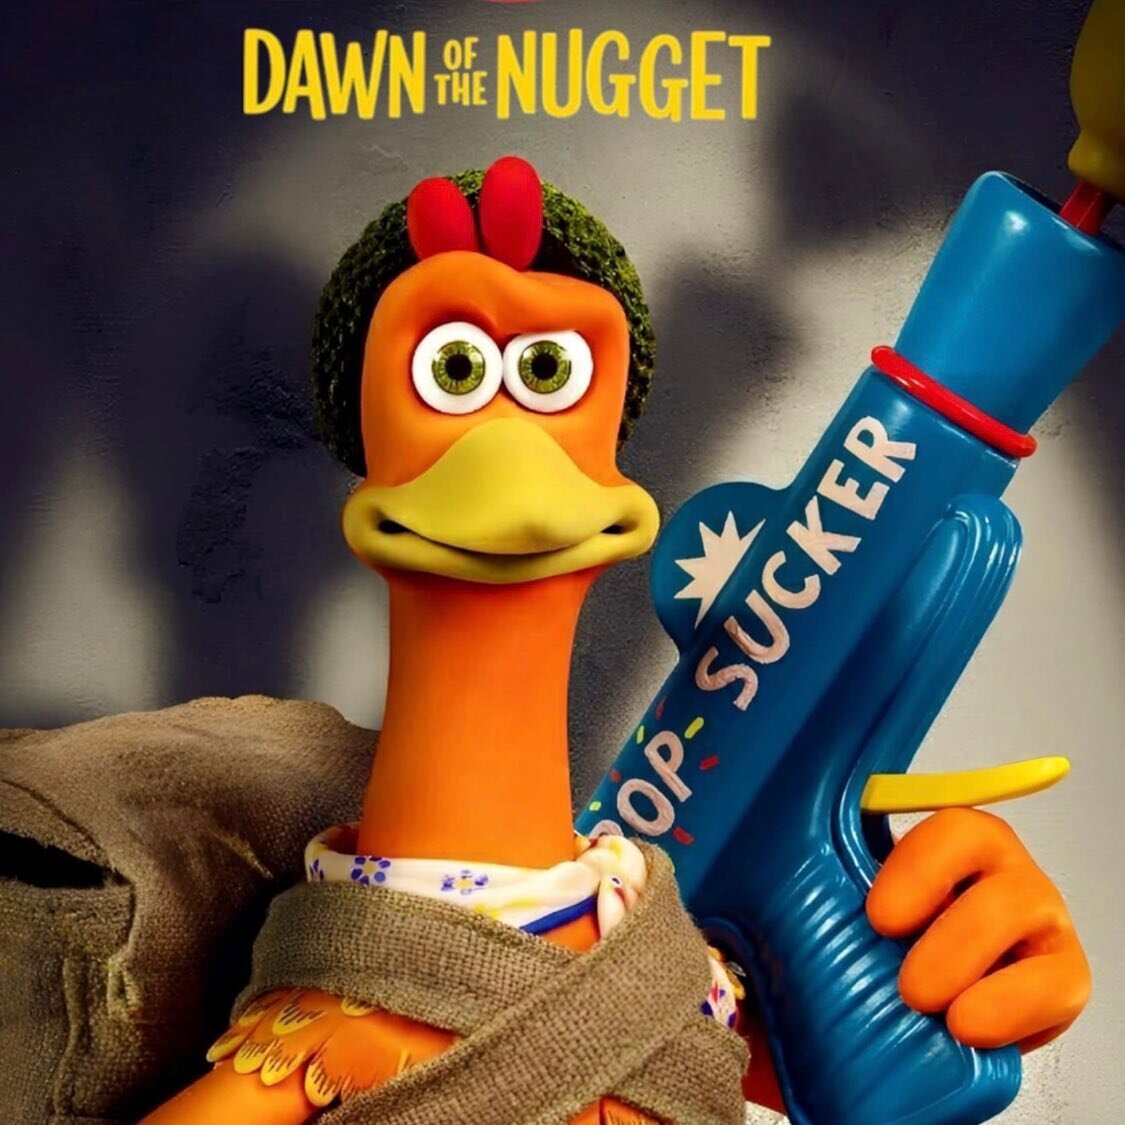 Enjoyed ringing in the new year watching the new @aardmananimations film Chicken Run Dawn of the Nugget! Action packed and suspenseful, colorful design and of course egg-cellent animation!! A &lsquo;bucket&rsquo; list must-see!! #clayanimation #motio